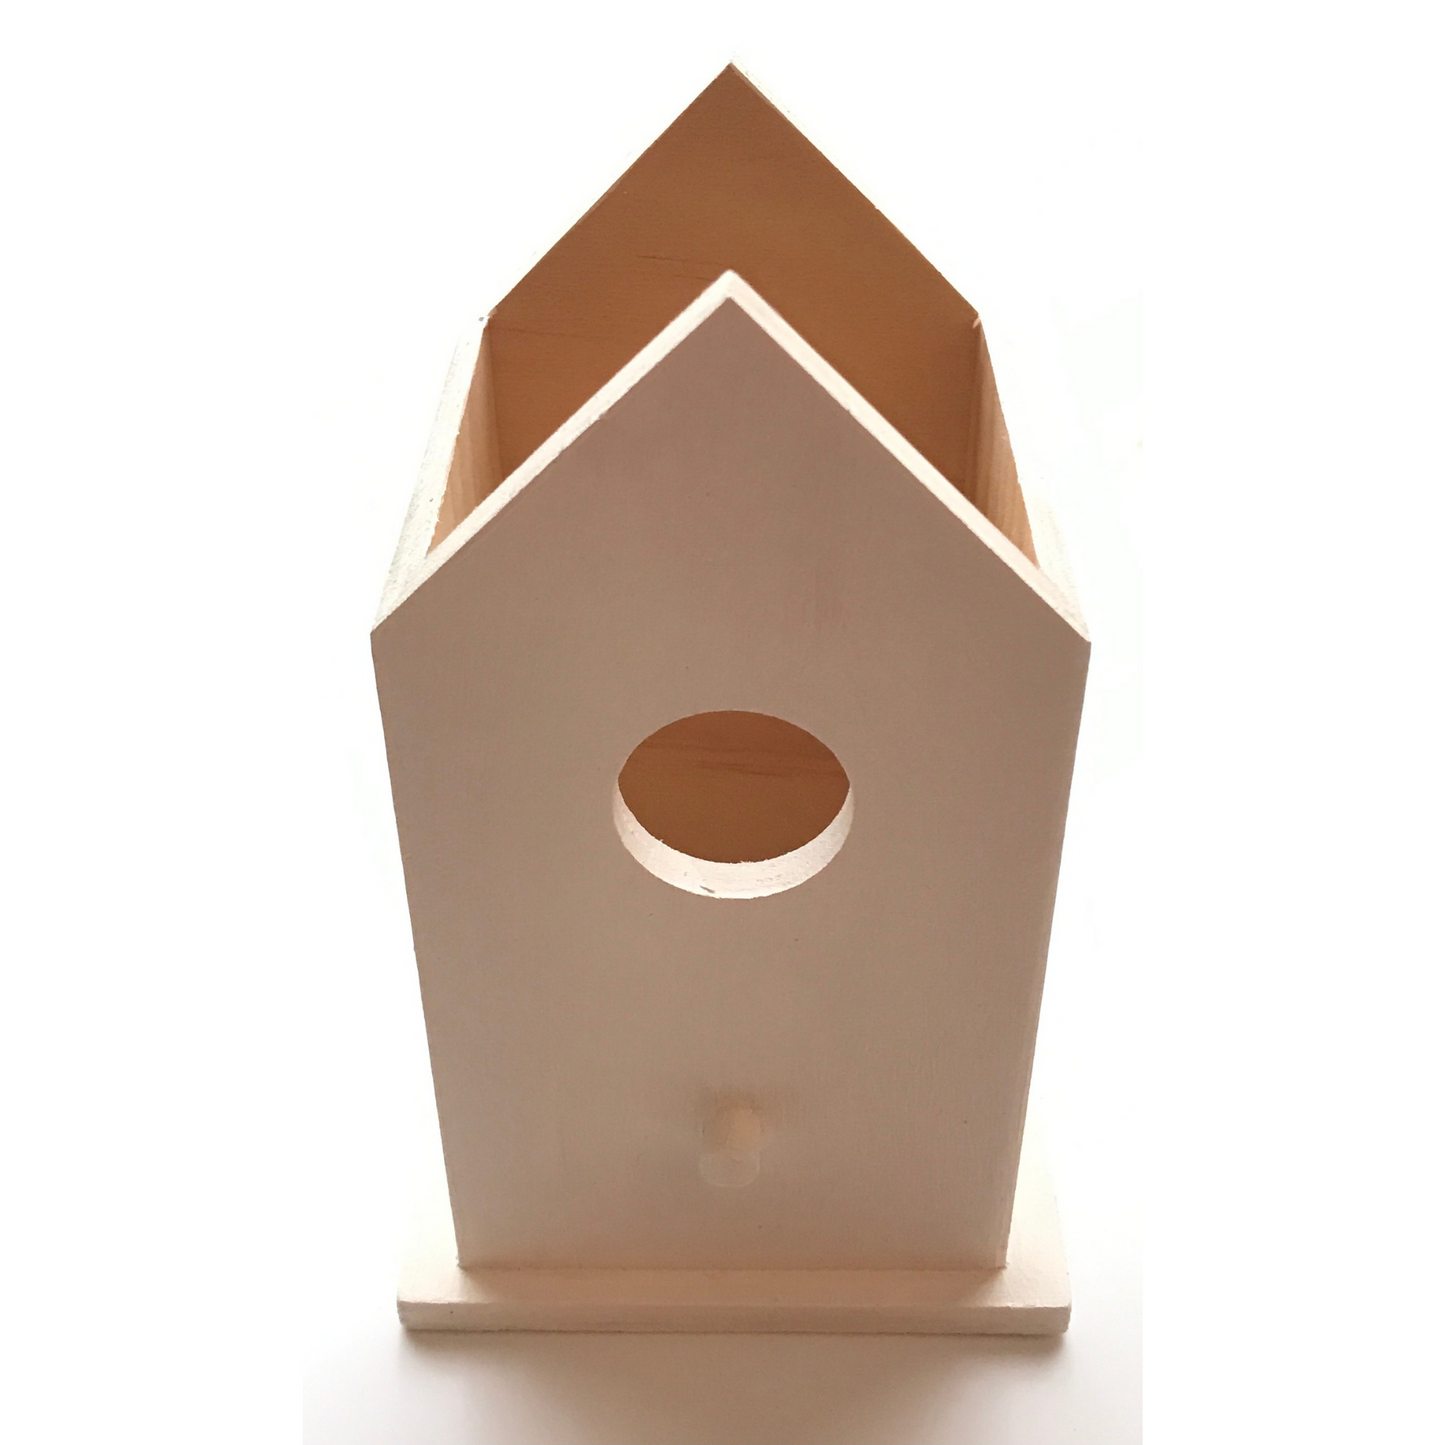 Birdhouse - primary school graduation "We flew out" - farewell gift for teacher - personalized with children's names